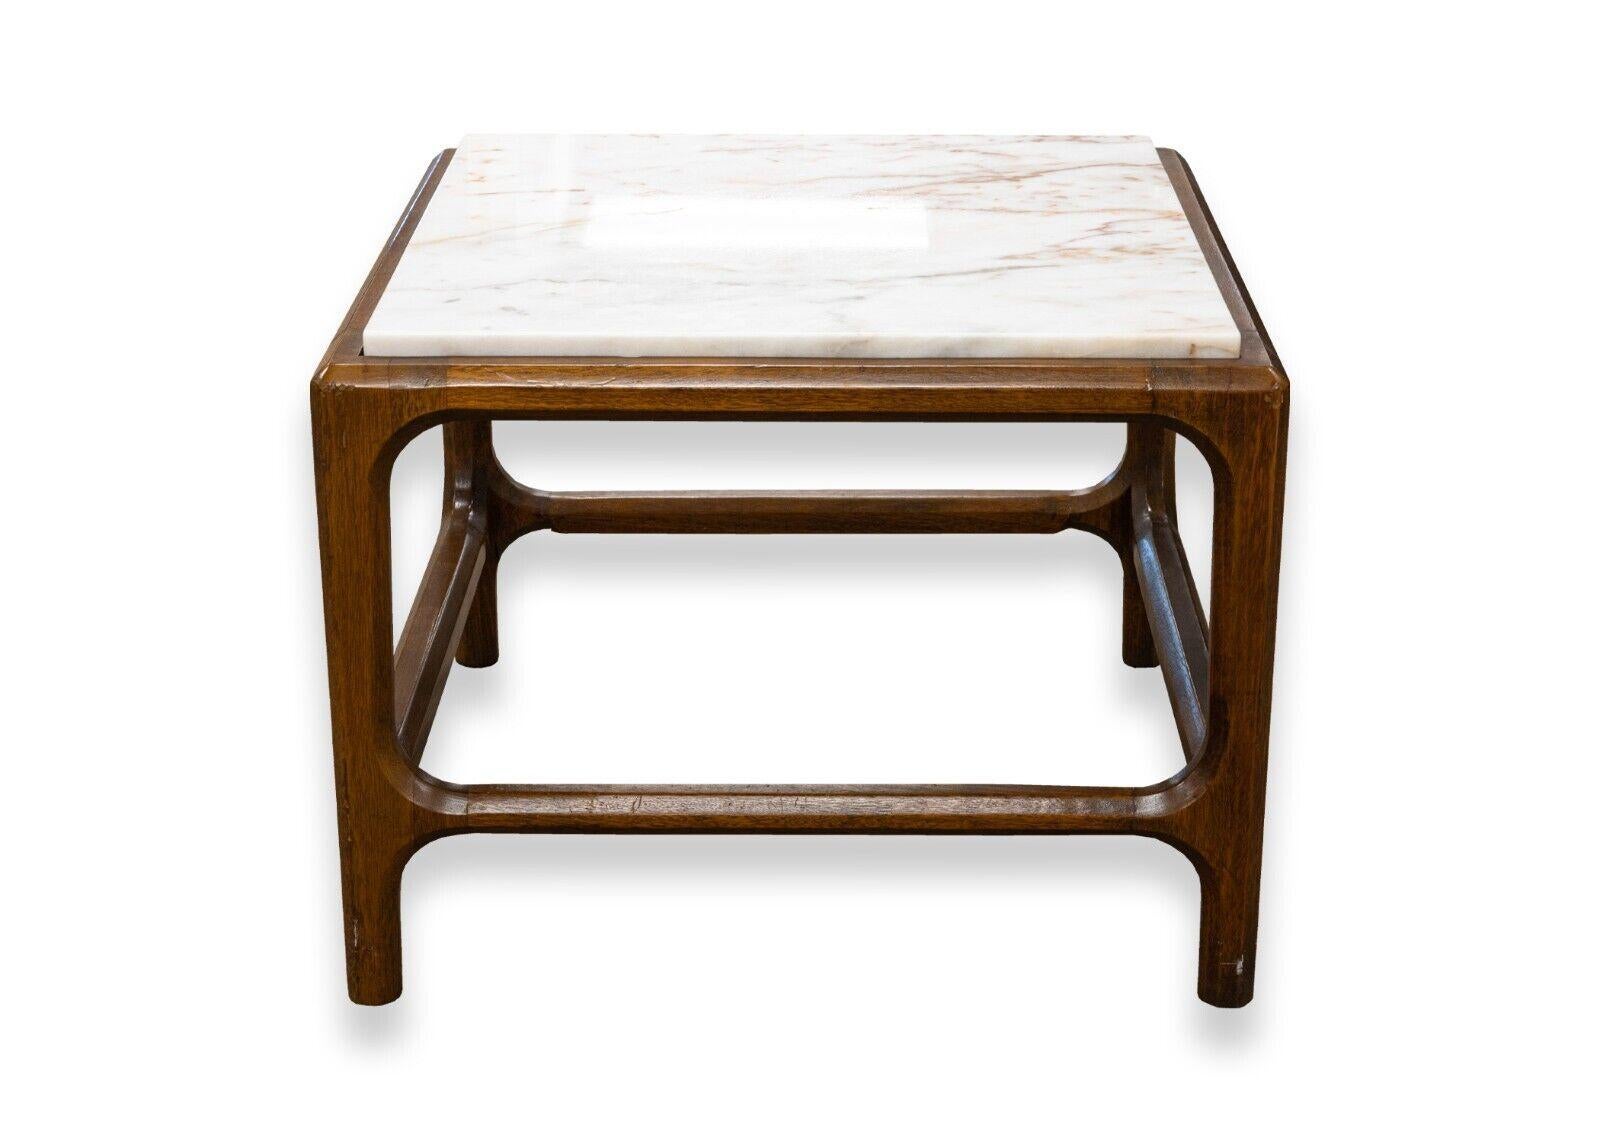 A pair of mid century modern mahogany wood and marble top side end tables. A stunning set of end tables featuring a rich mahogany wood frame with a gorgeous grain pattern, and a removable speckled marble top. This pair of tables are in very good